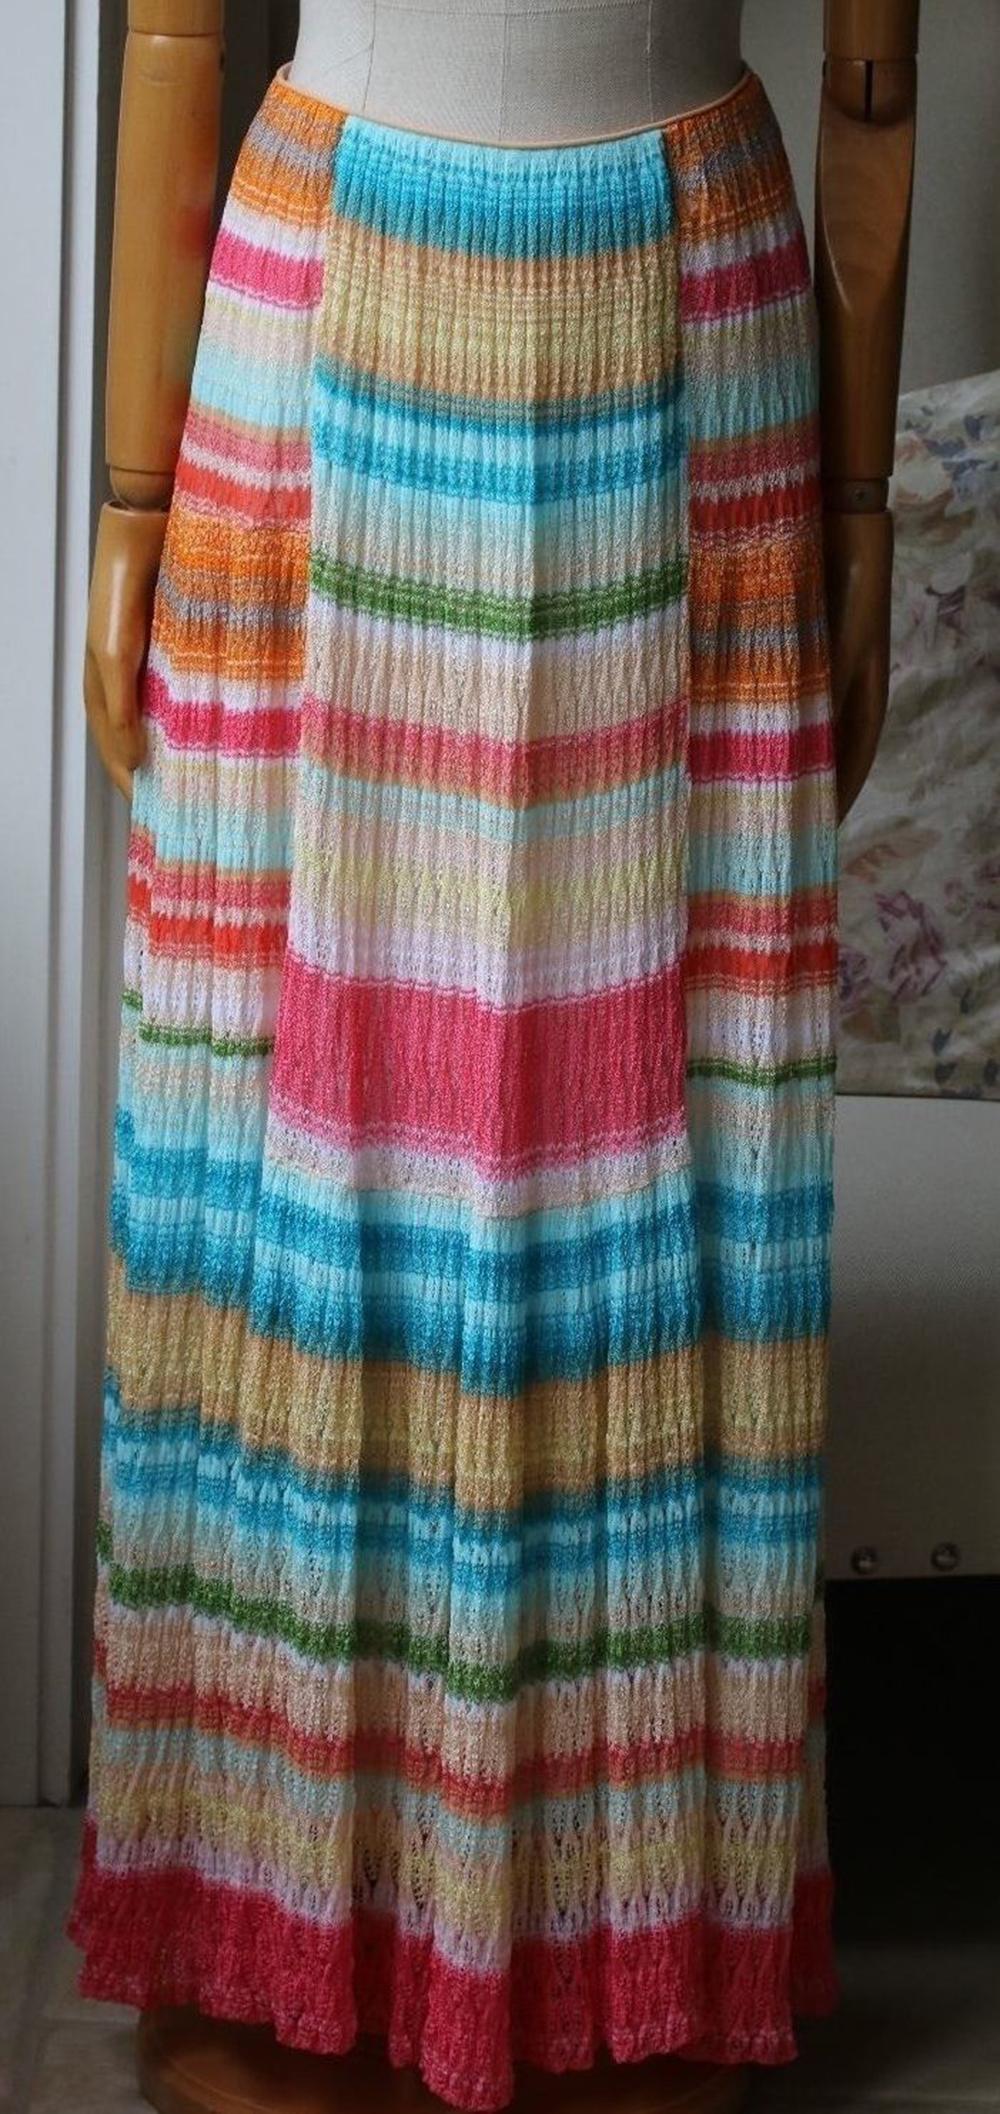 Missoni's maxi skirt has been crafted in Italy from the label's signature crochet-knit. This striped design has an elasticated waistband for a precise fit and is fully lined for a smooth finish. Multicolored crochet-knit. Slips on. 70% rayon, 30%